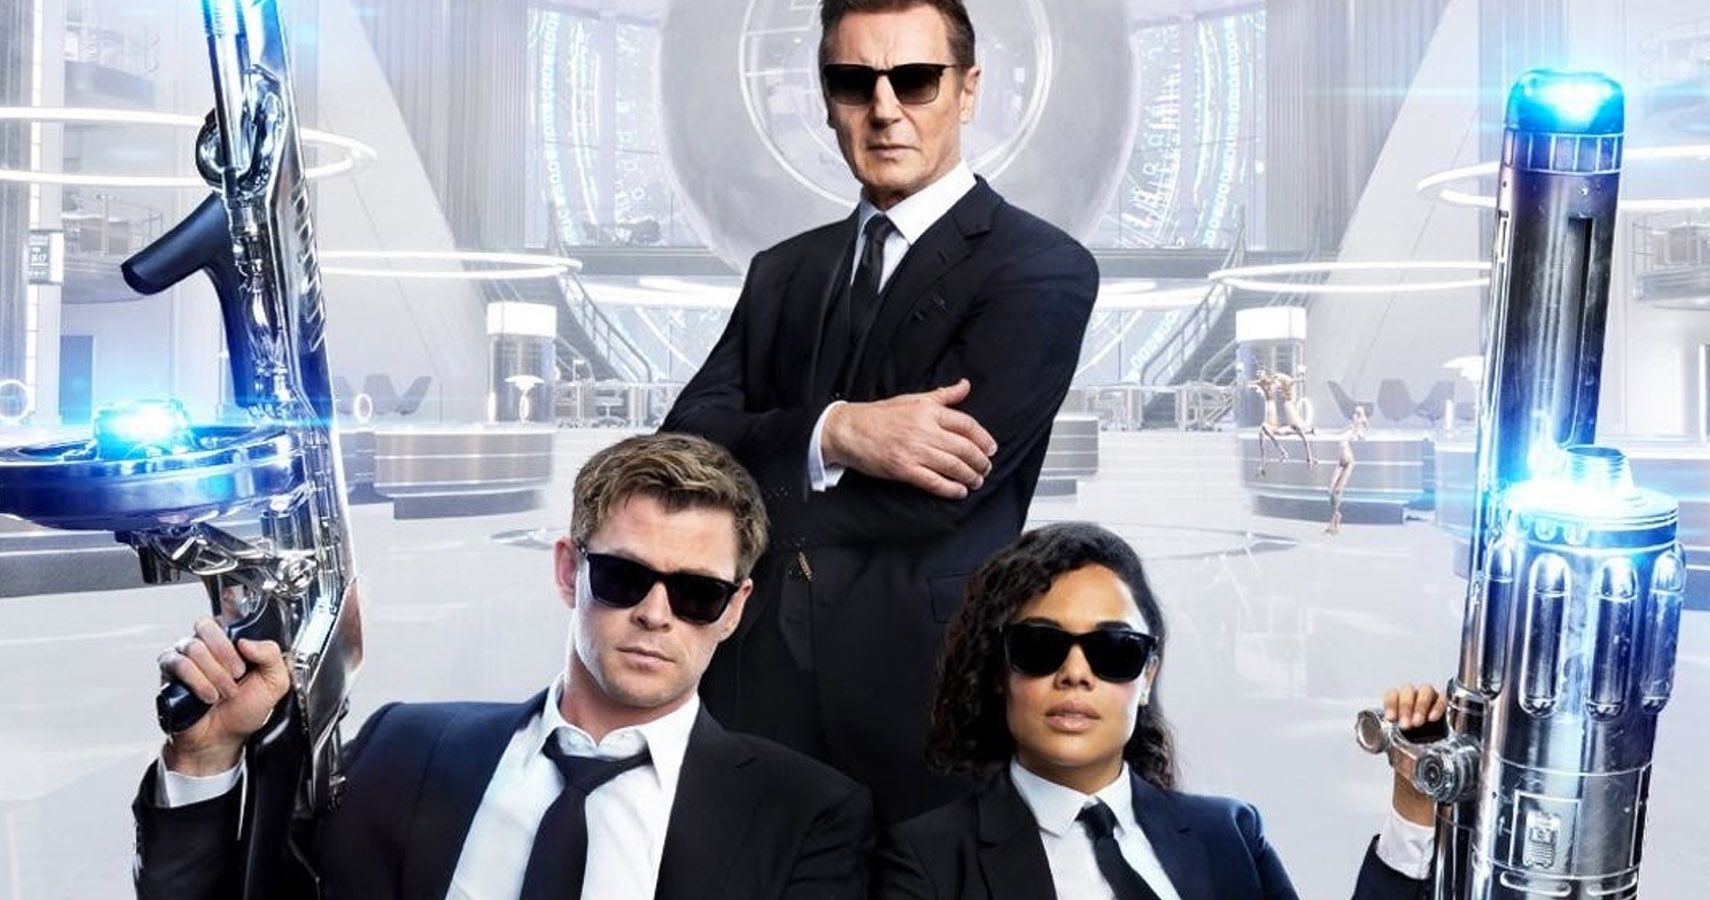 10 Things You Didn't Know About The Men In Black Franchise